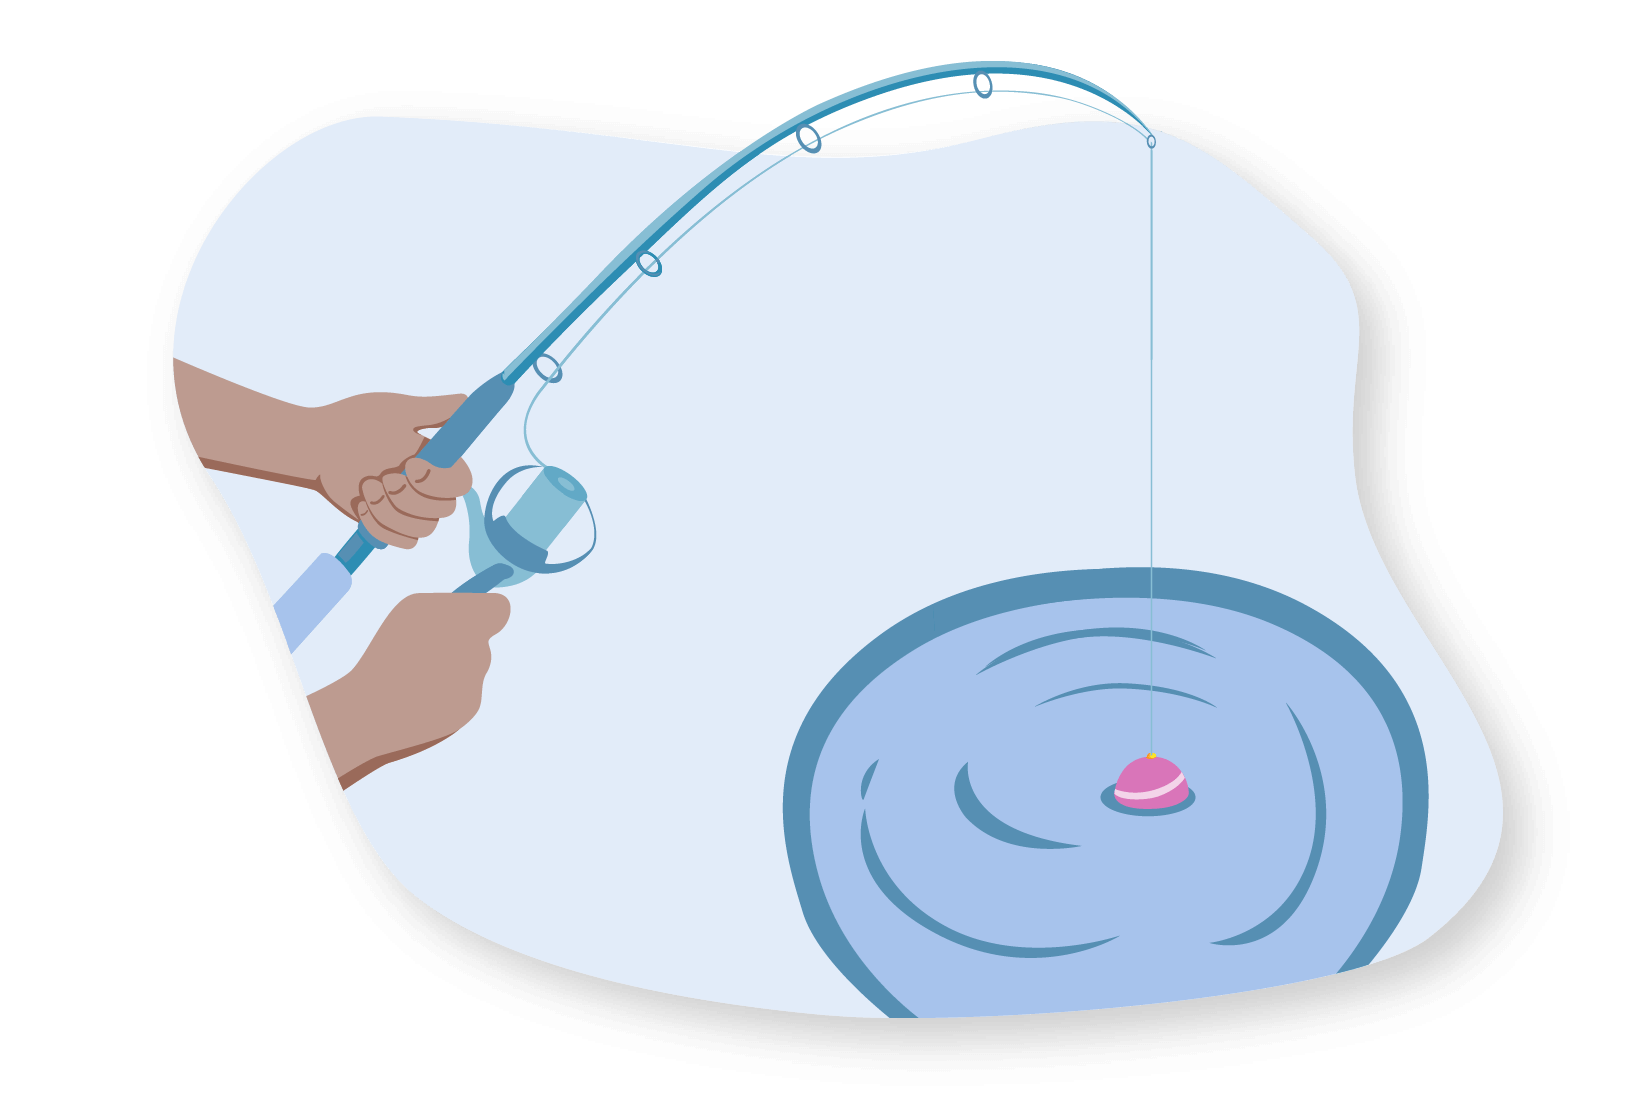 Illustration of a young person fishing